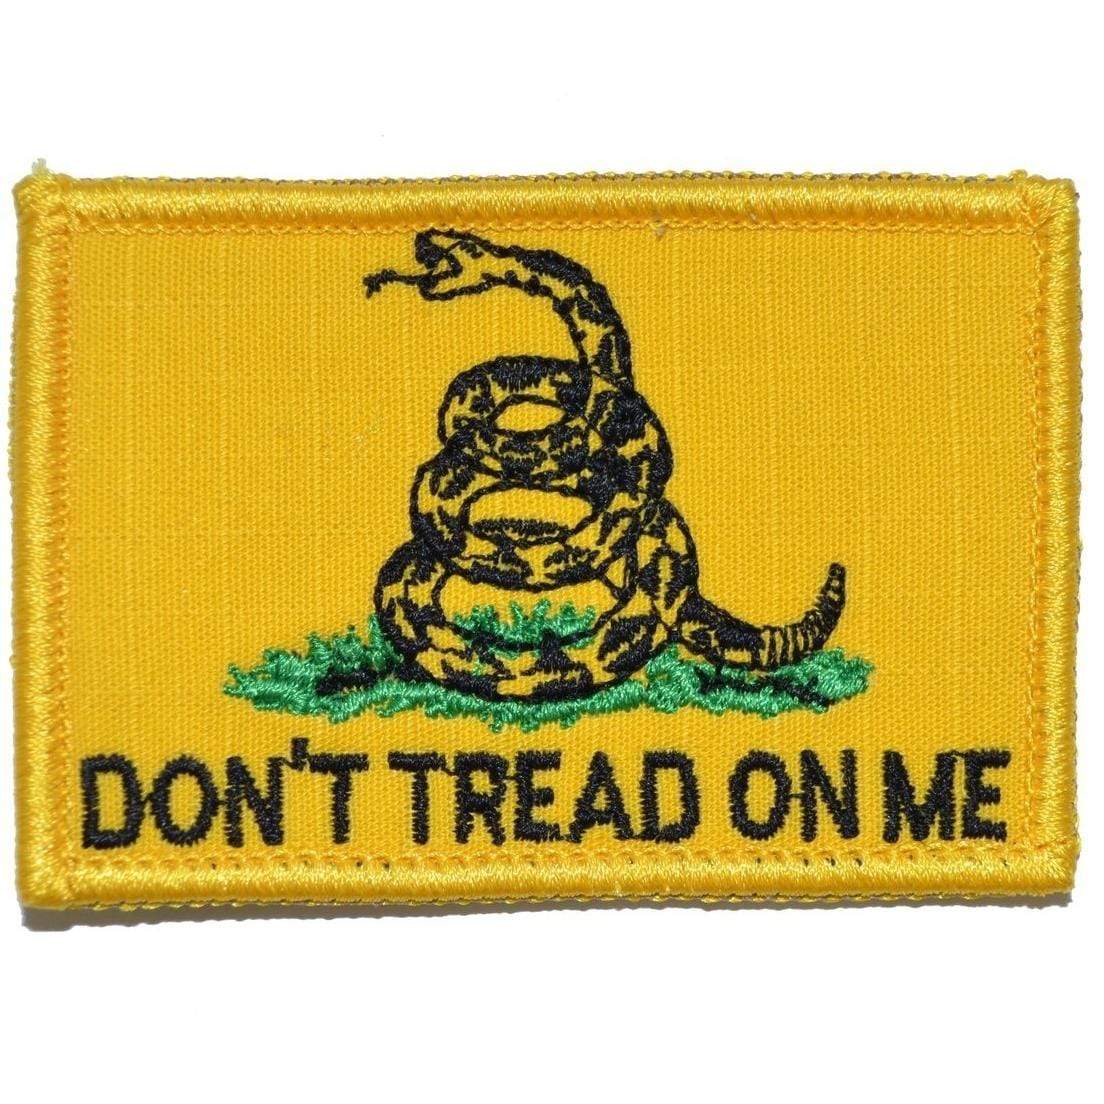 Don't Tread on Me Color Patch 